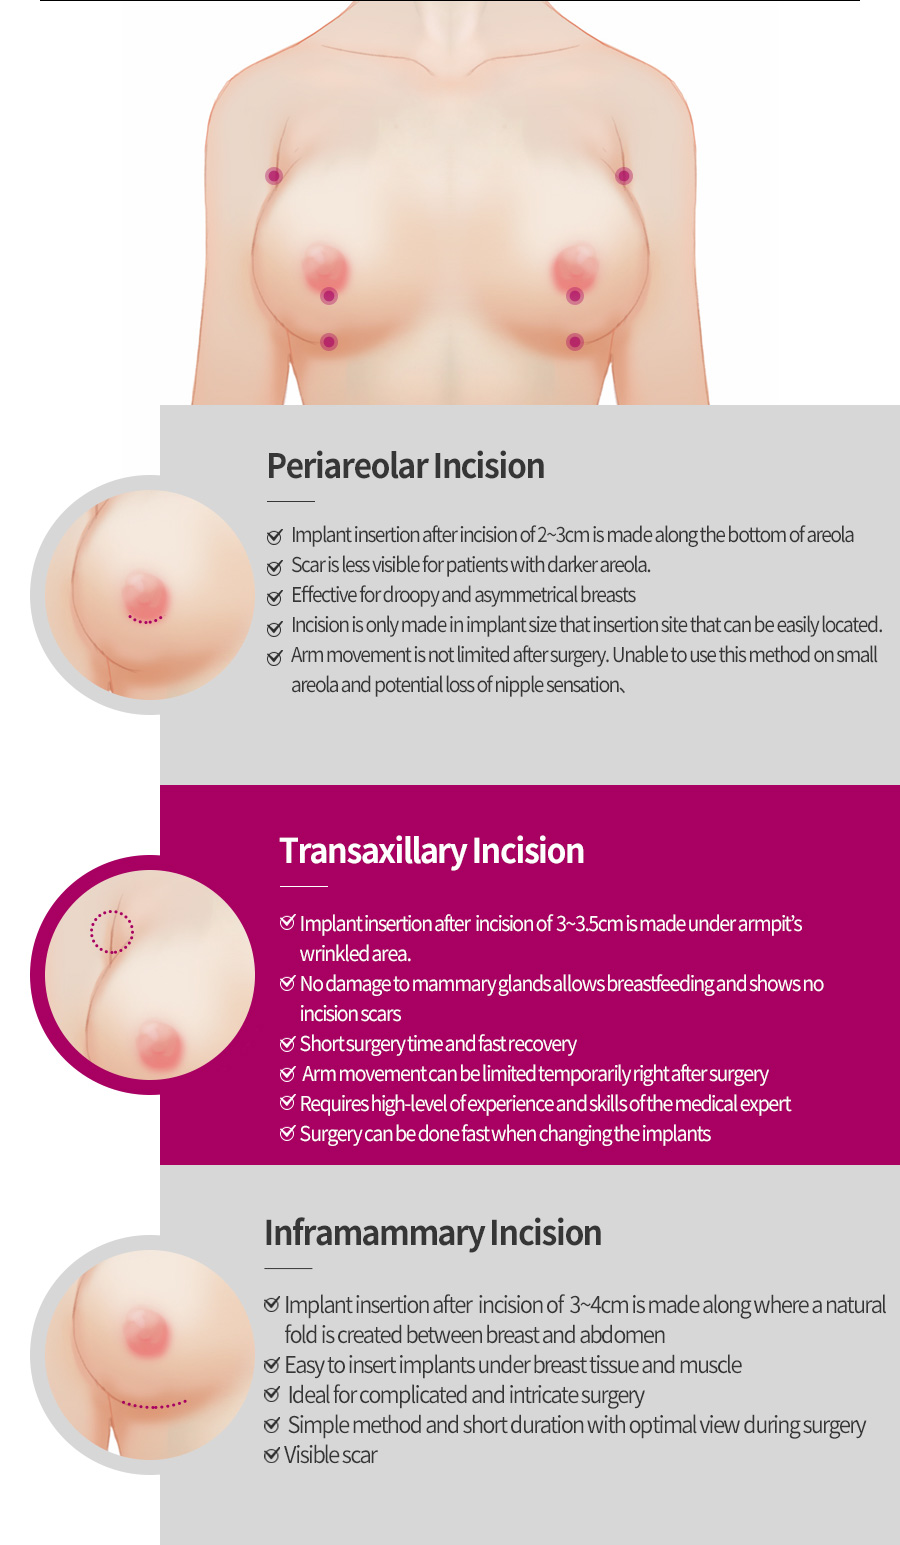 Periareolar Incision / Transaxillary Incision / Inframammary Incision